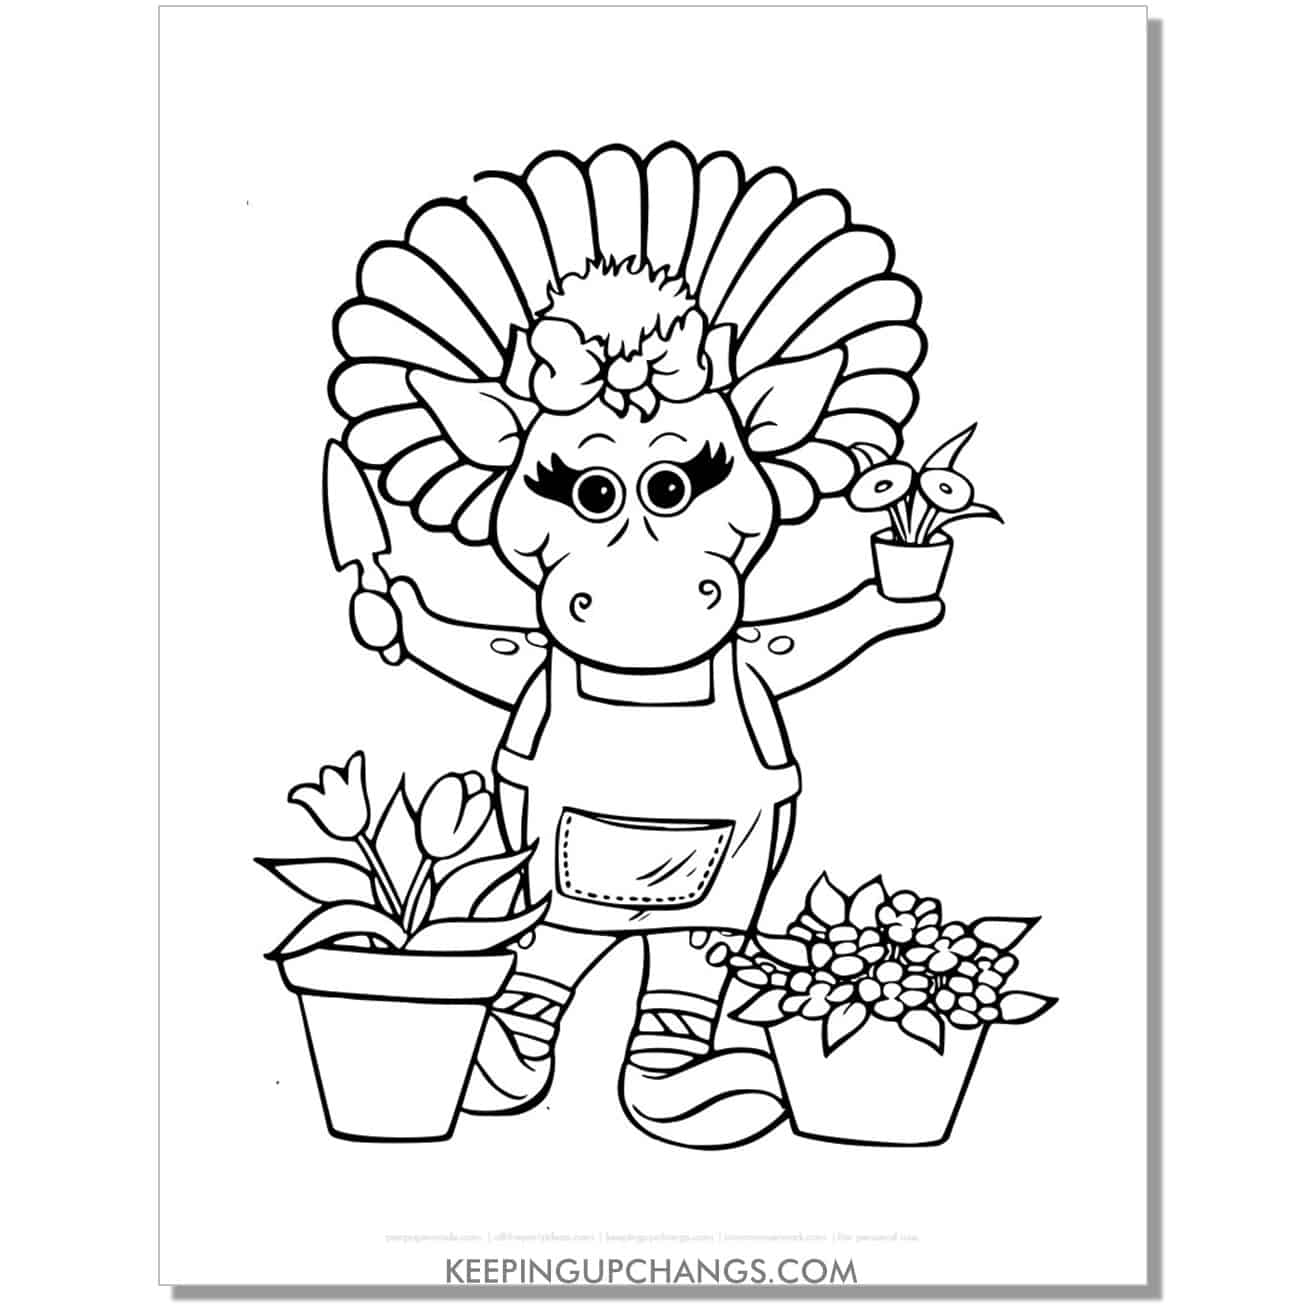 free baby bop the gardener coloring page, sheet.